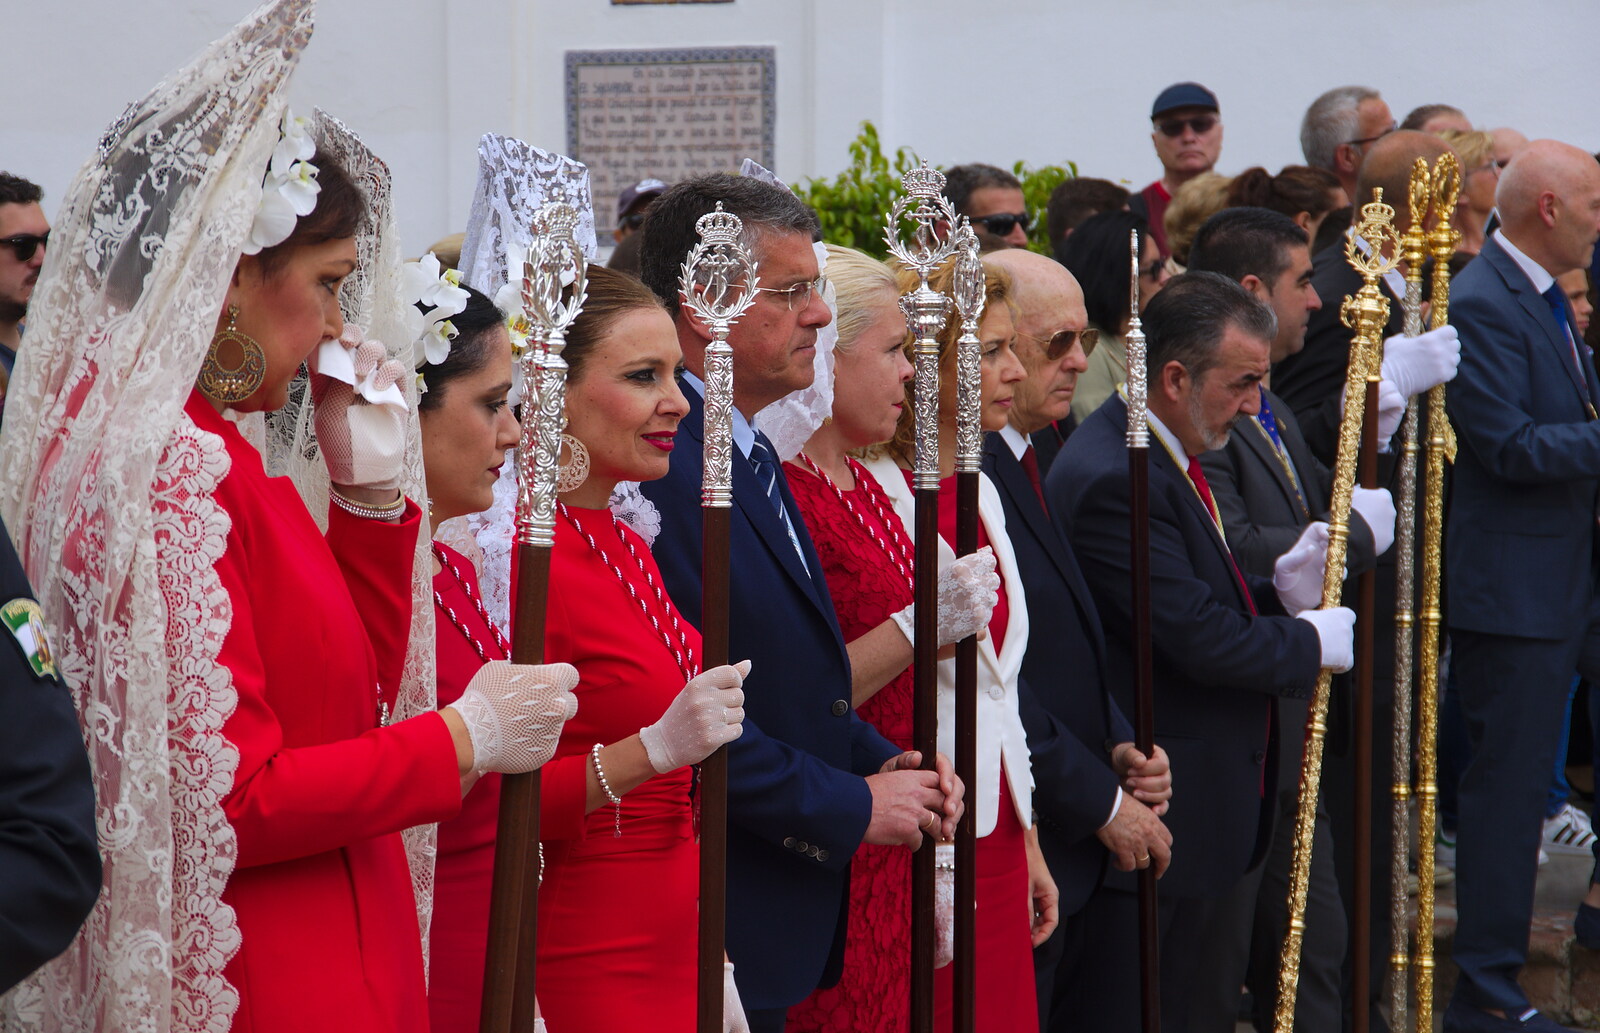 Lots of people with shiny staffs from An Easter Parade, Nerja, Andalusia, Spain - 21st April 2019